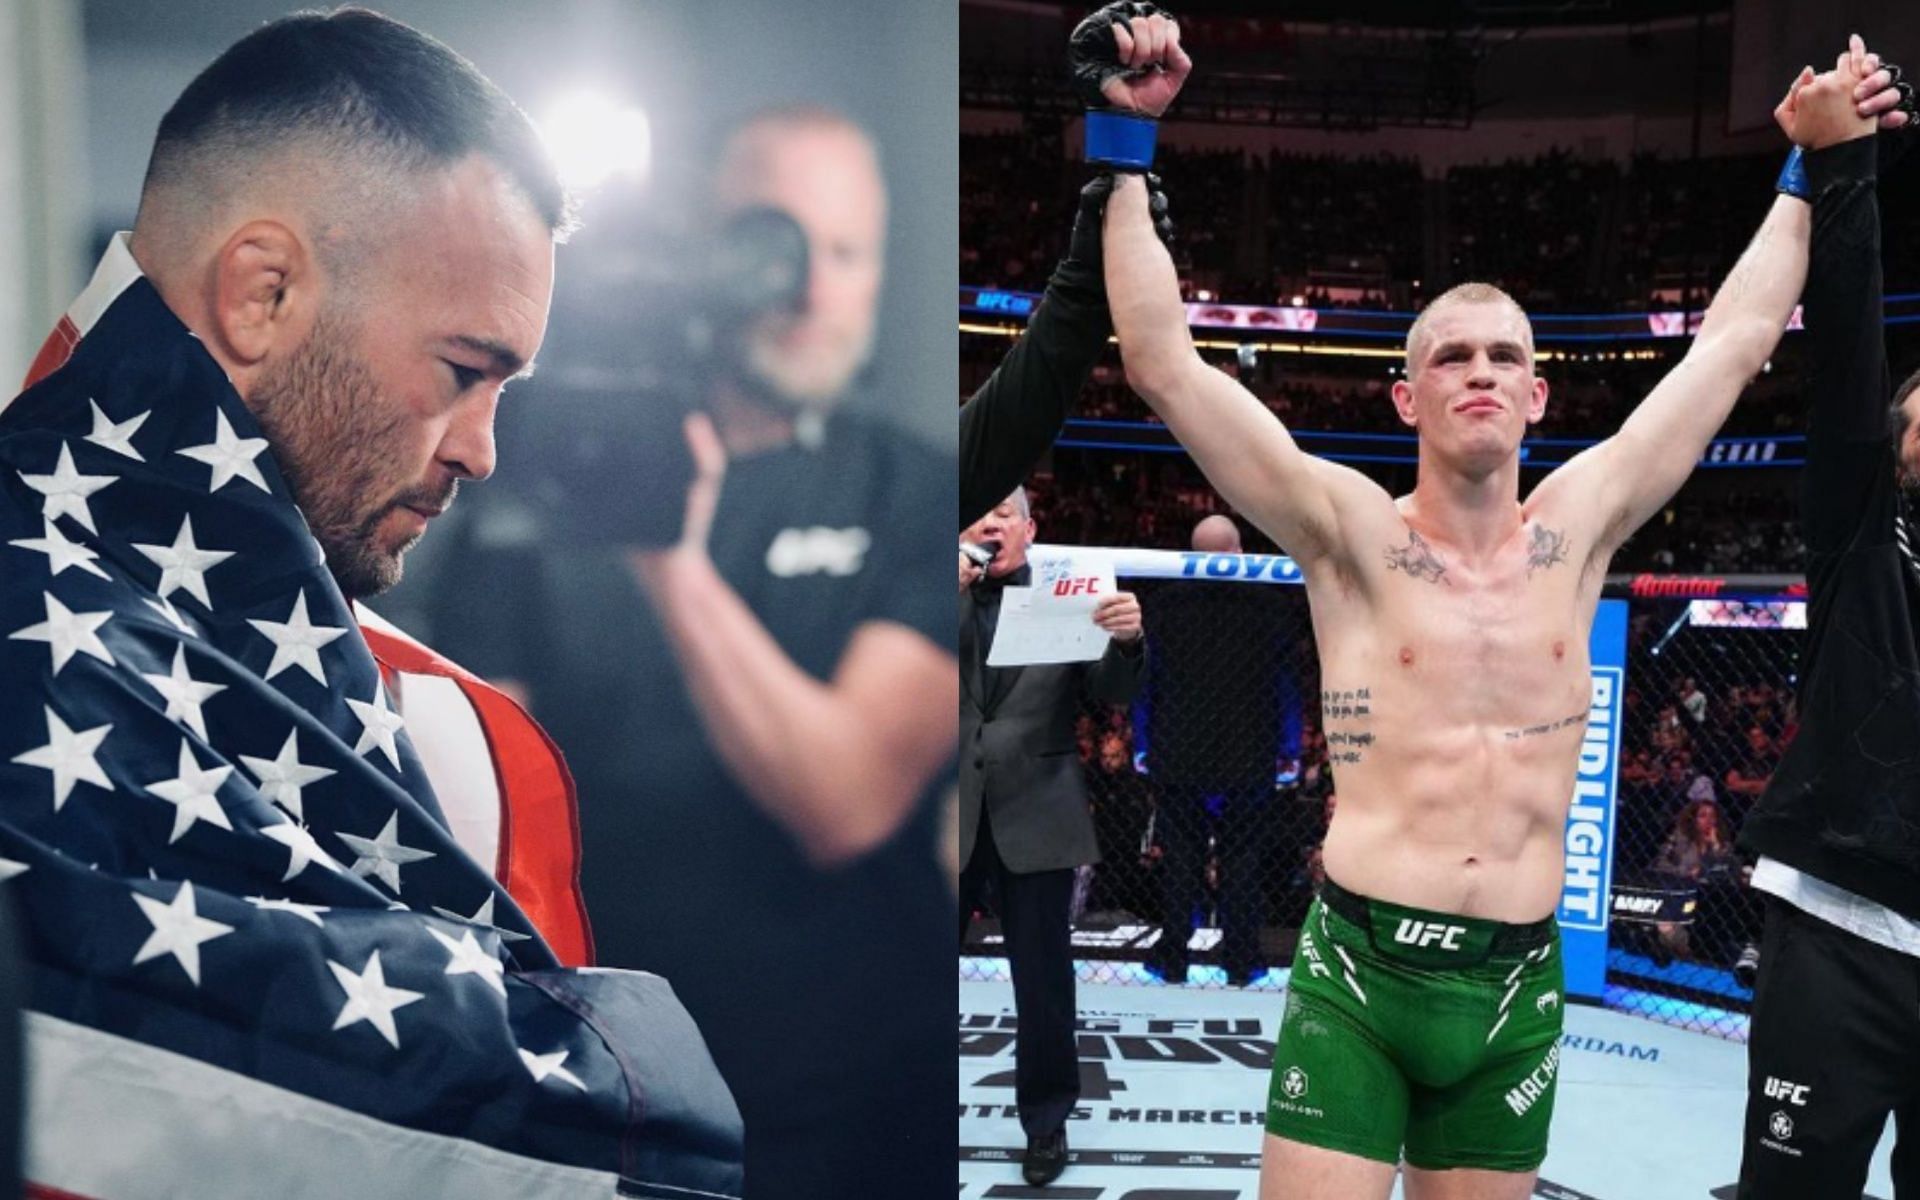 Ian Garry (R) has allegedly signed a deal to fight Colby Covington (L) [Images via @iangarry and @colbycovington on Instagram]